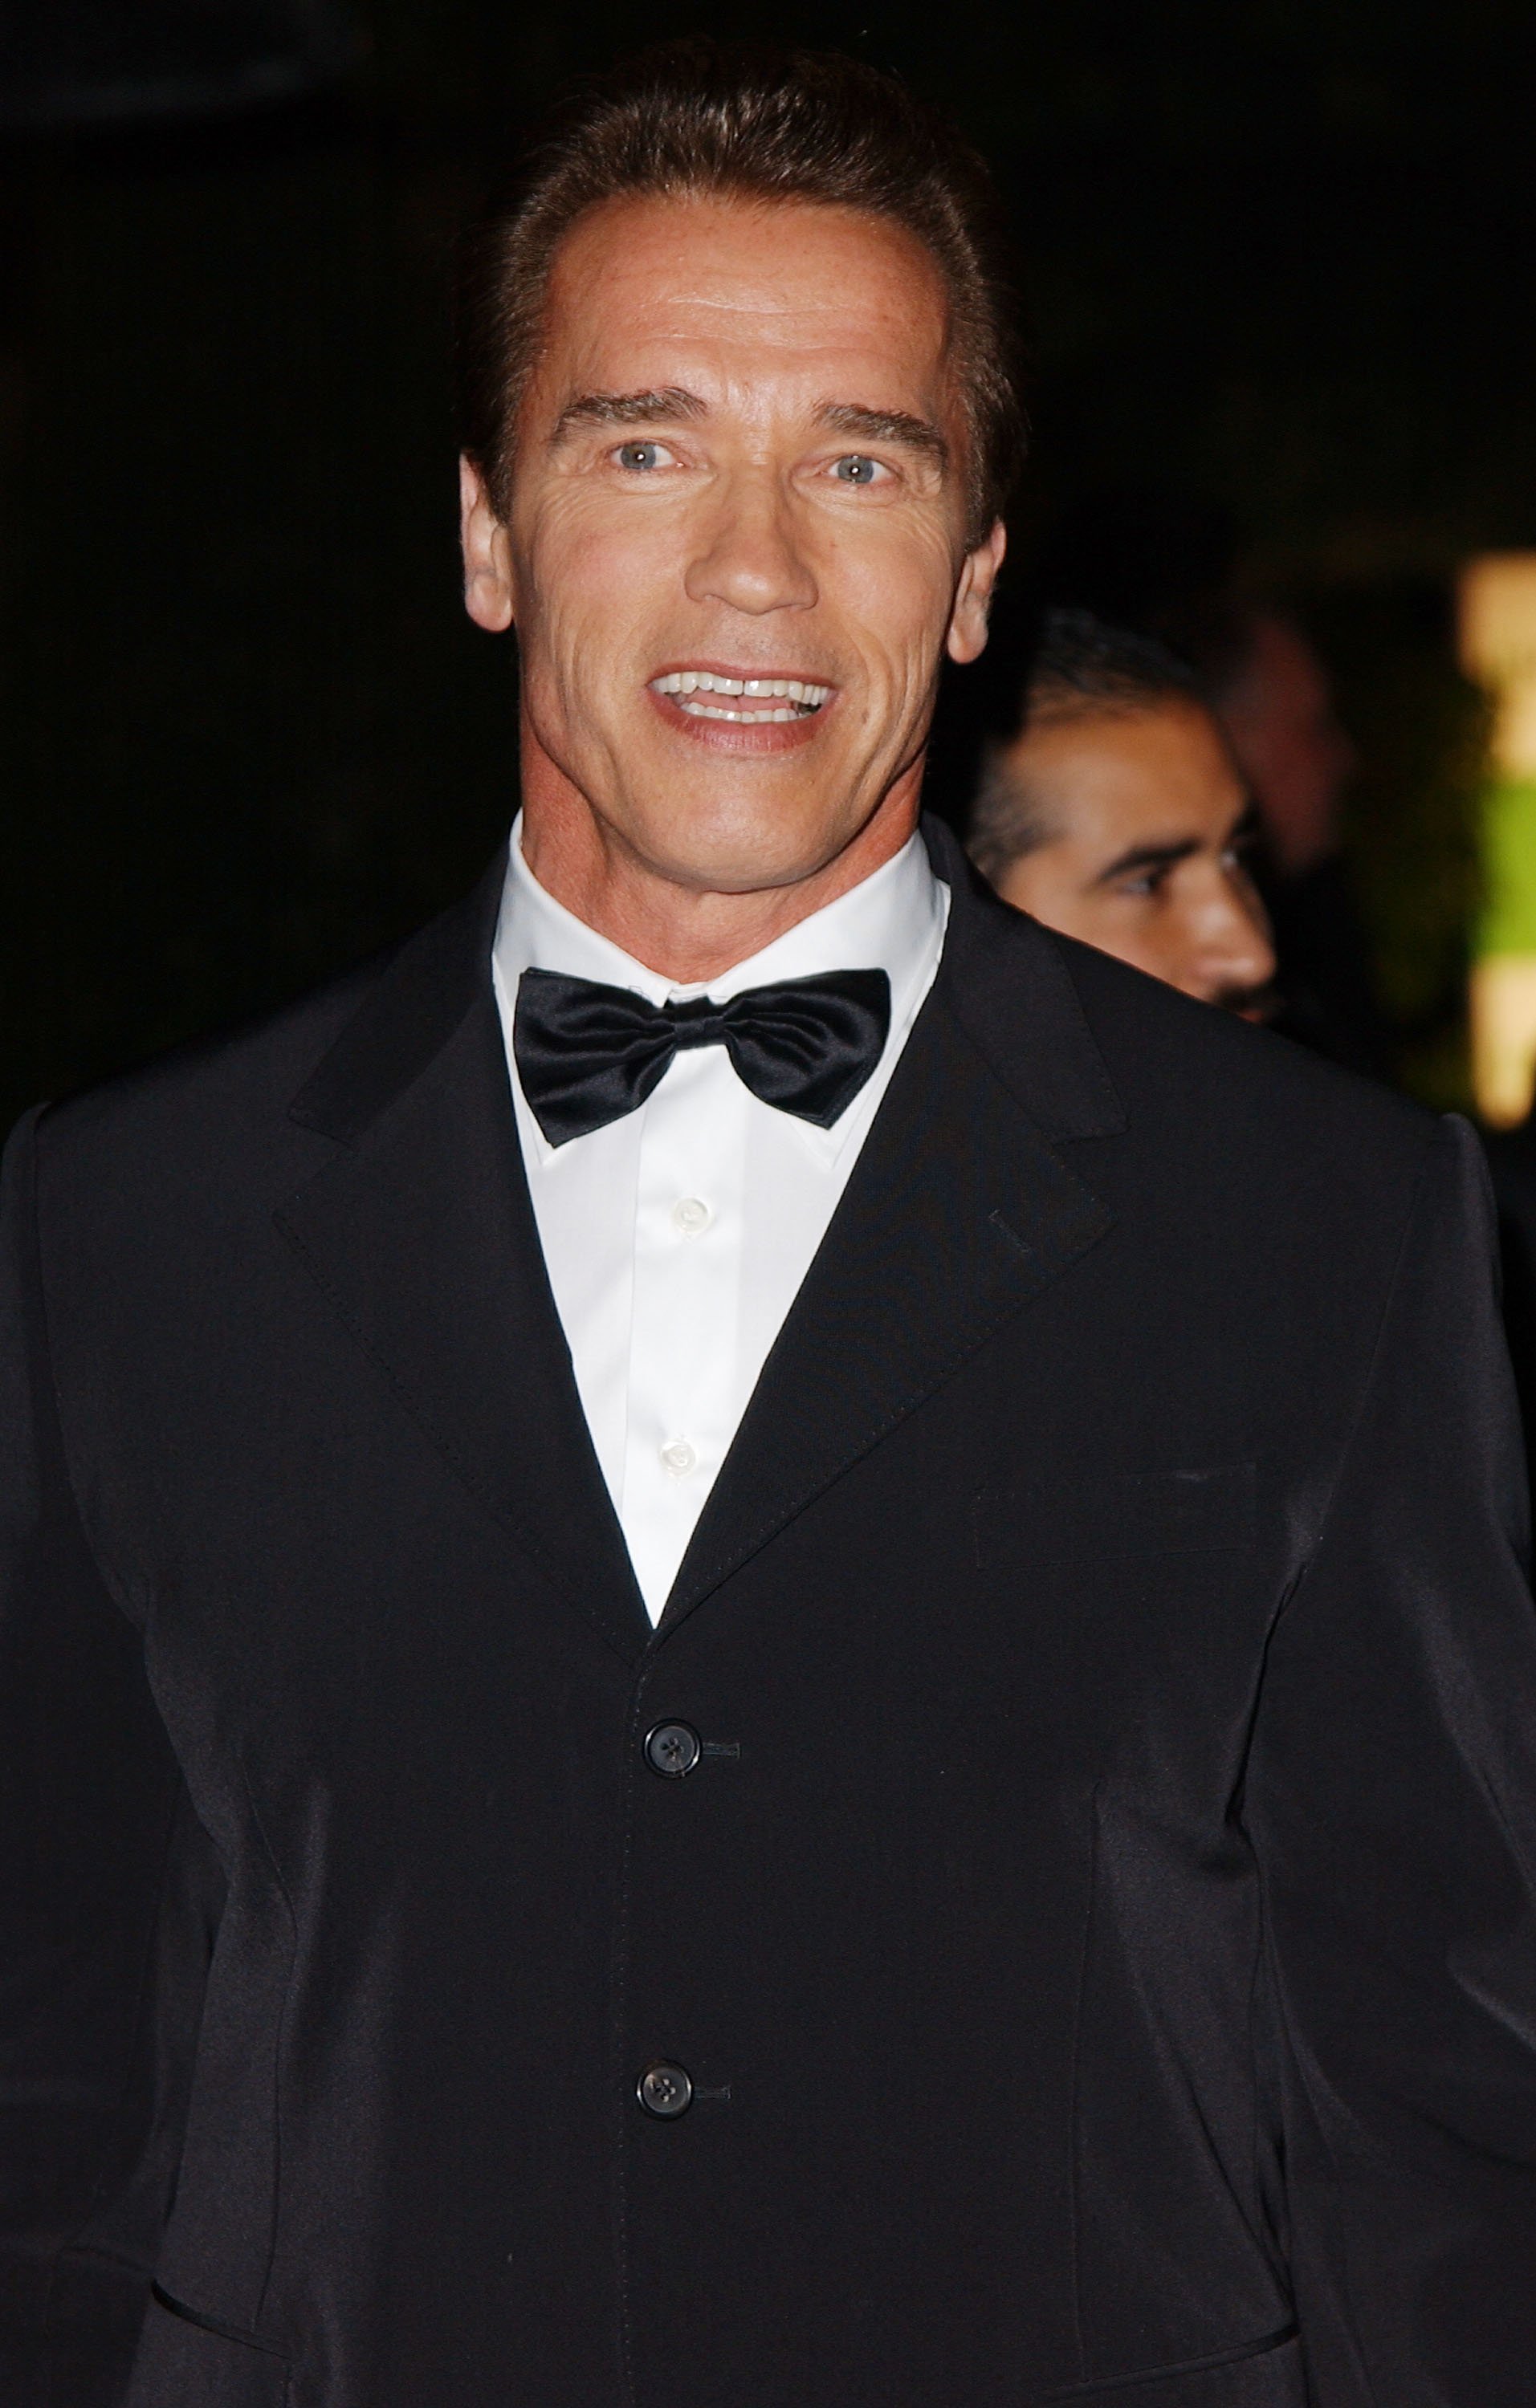 Arnold Schwarzenegger attends a Mentor Foundation event in Hollywood, California on November 3, 2002 | Photo: Getty Images